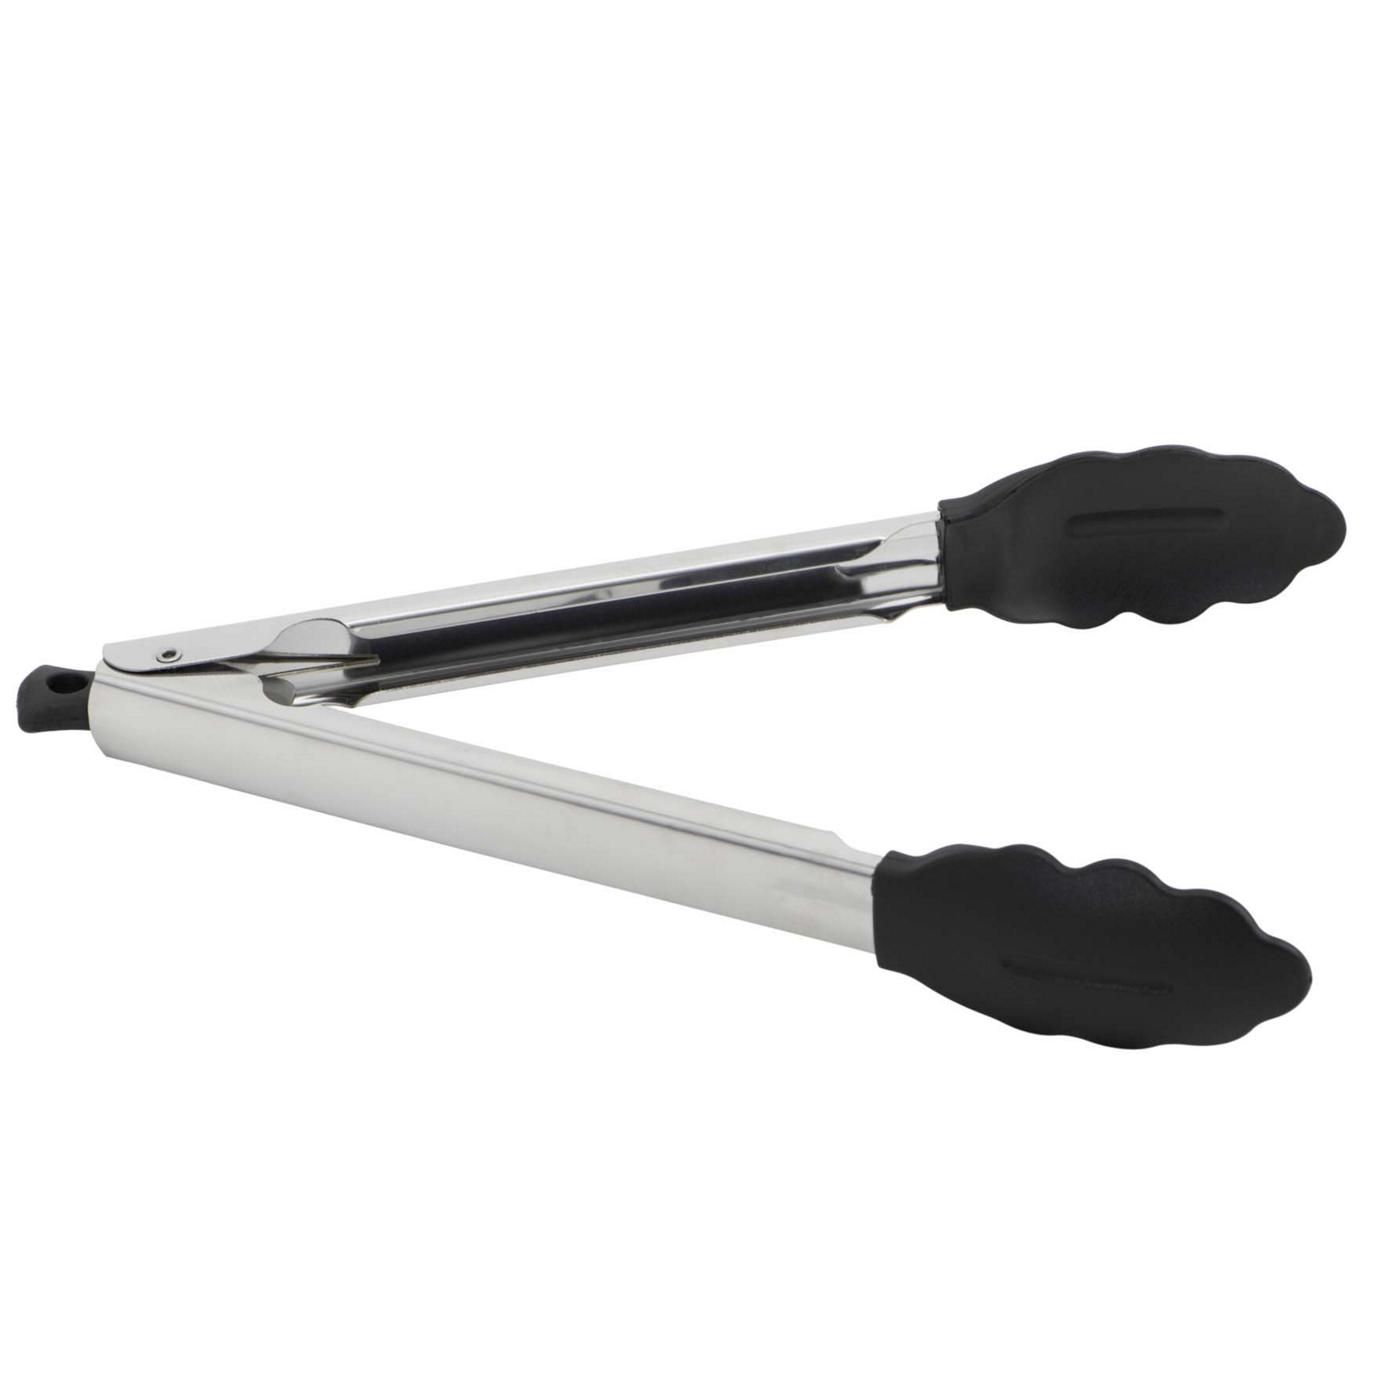 chefstyle Silicone Tip Locking Tongs - Shop Utensils & Gadgets at